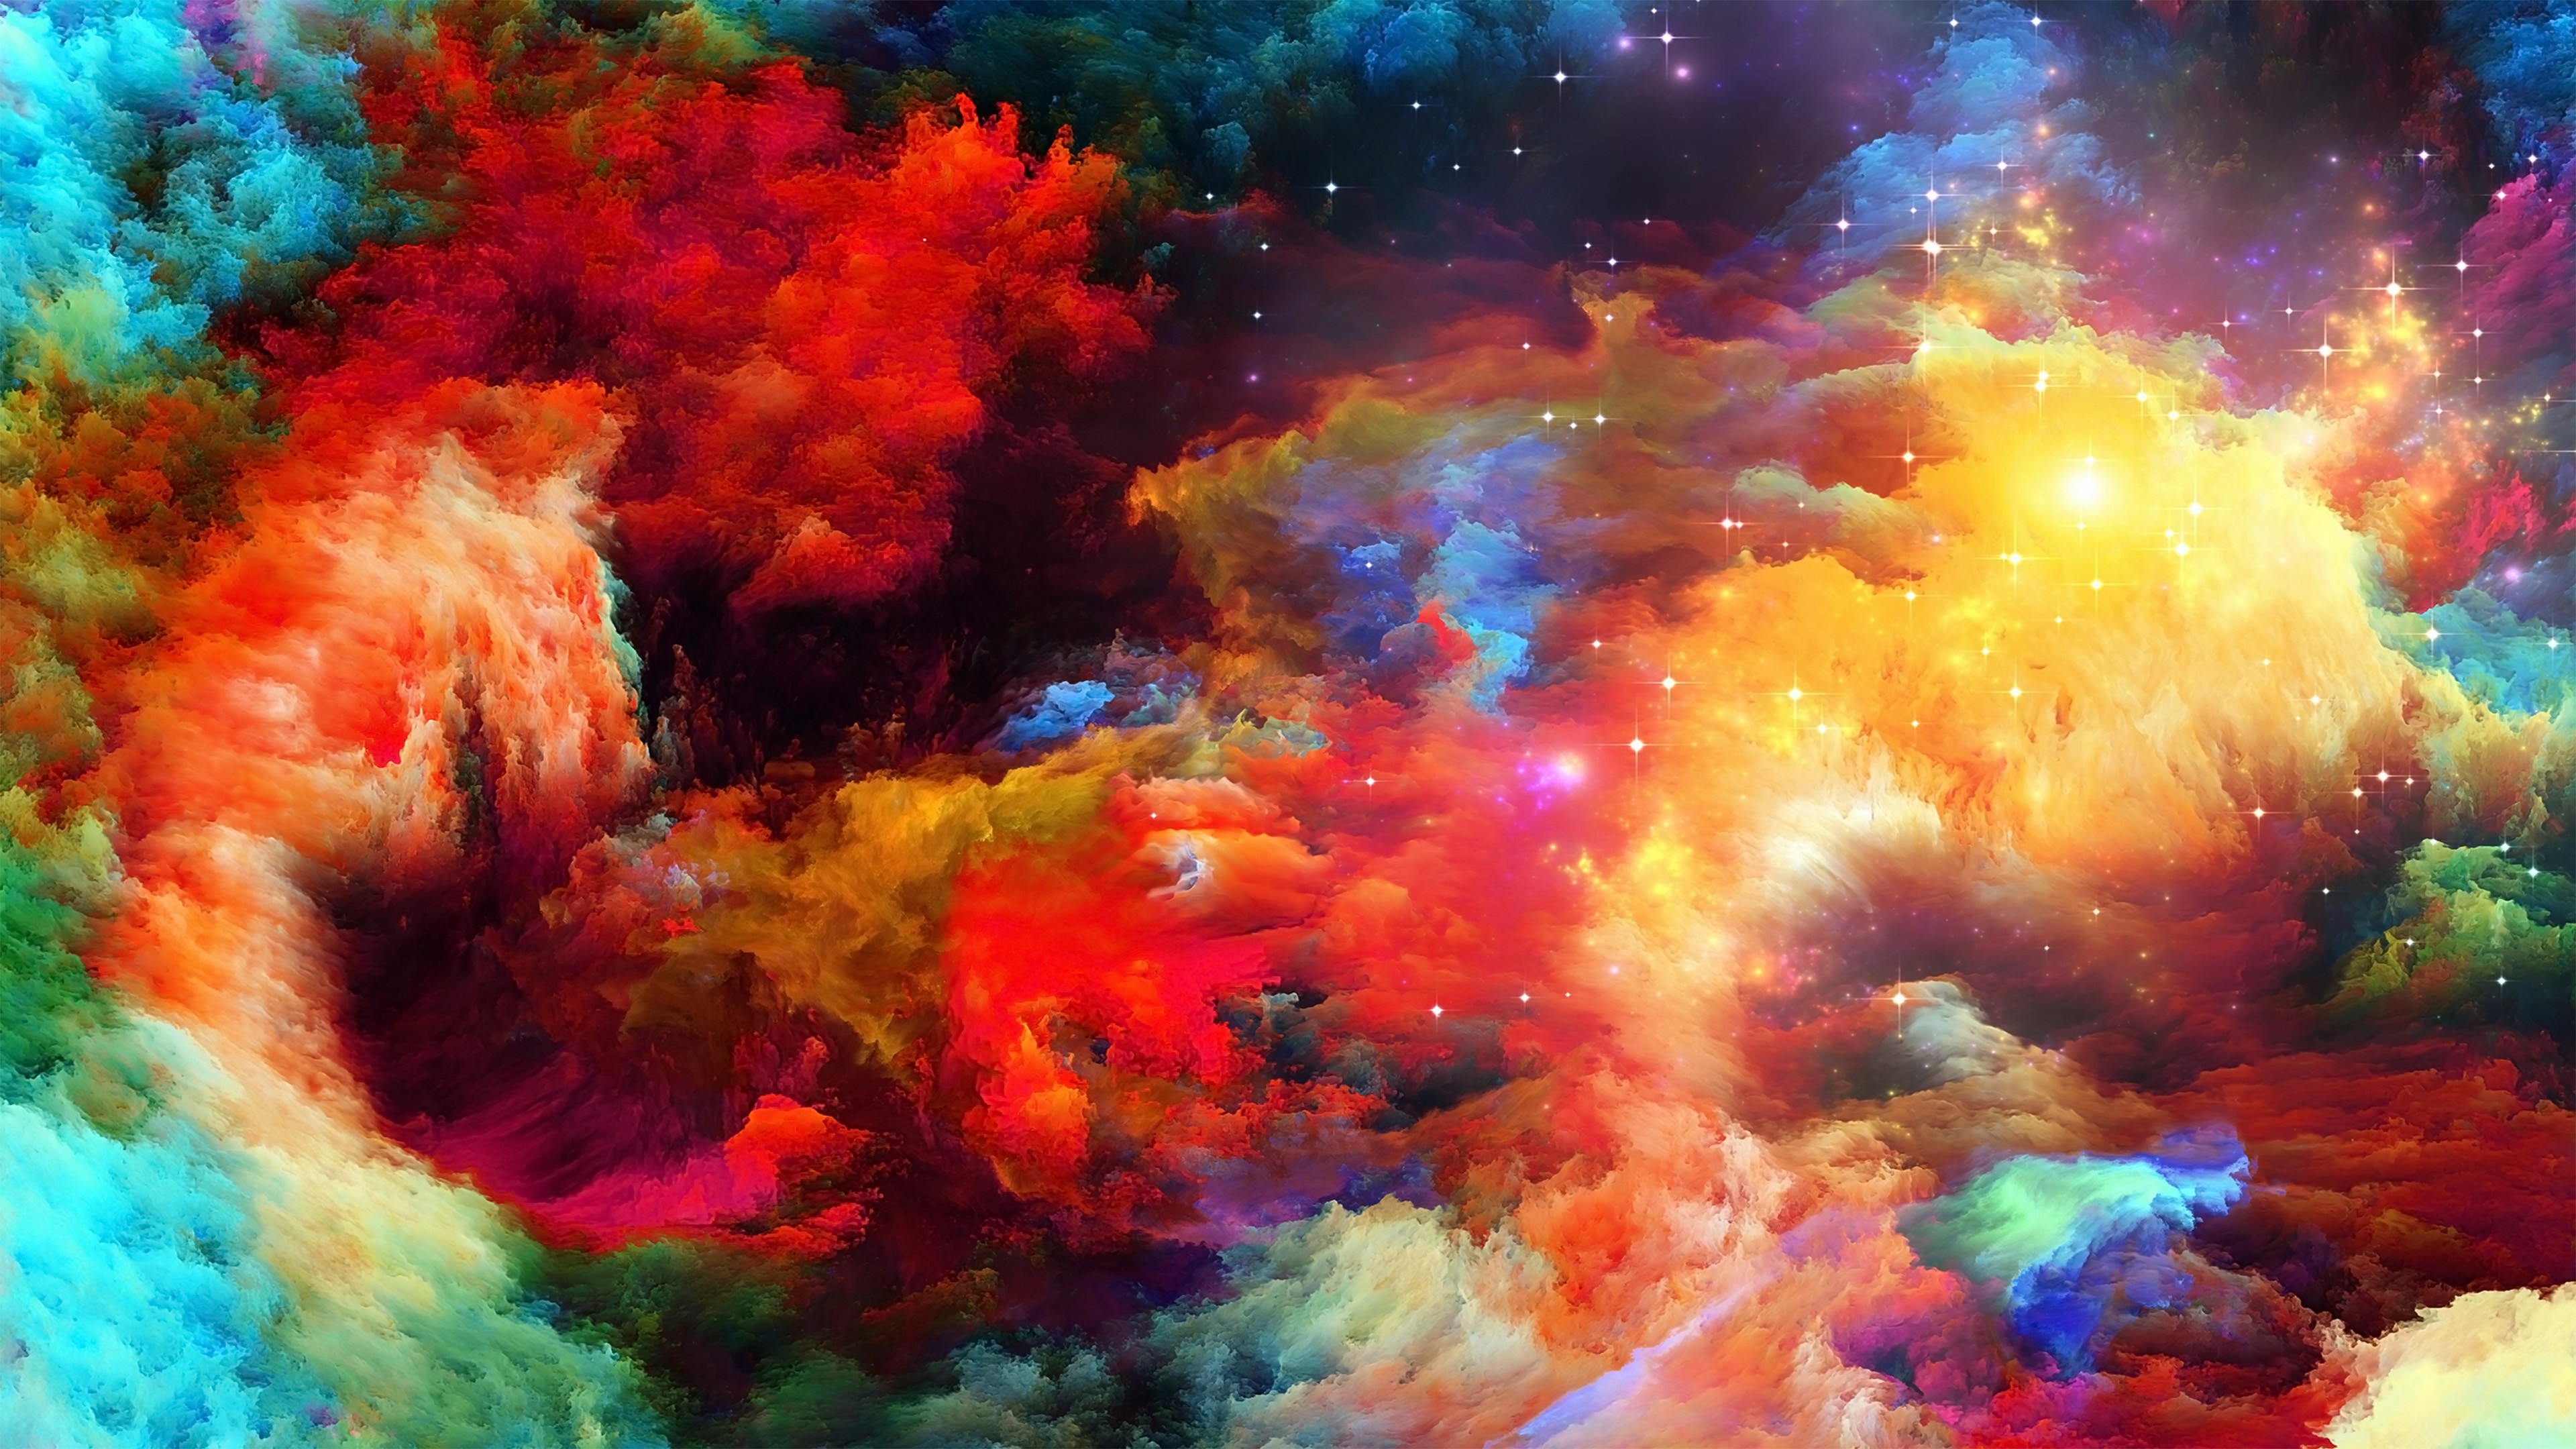 4K Abstract wallpaper ·① Download free stunning HD wallpapers for desktop and mobile devices in